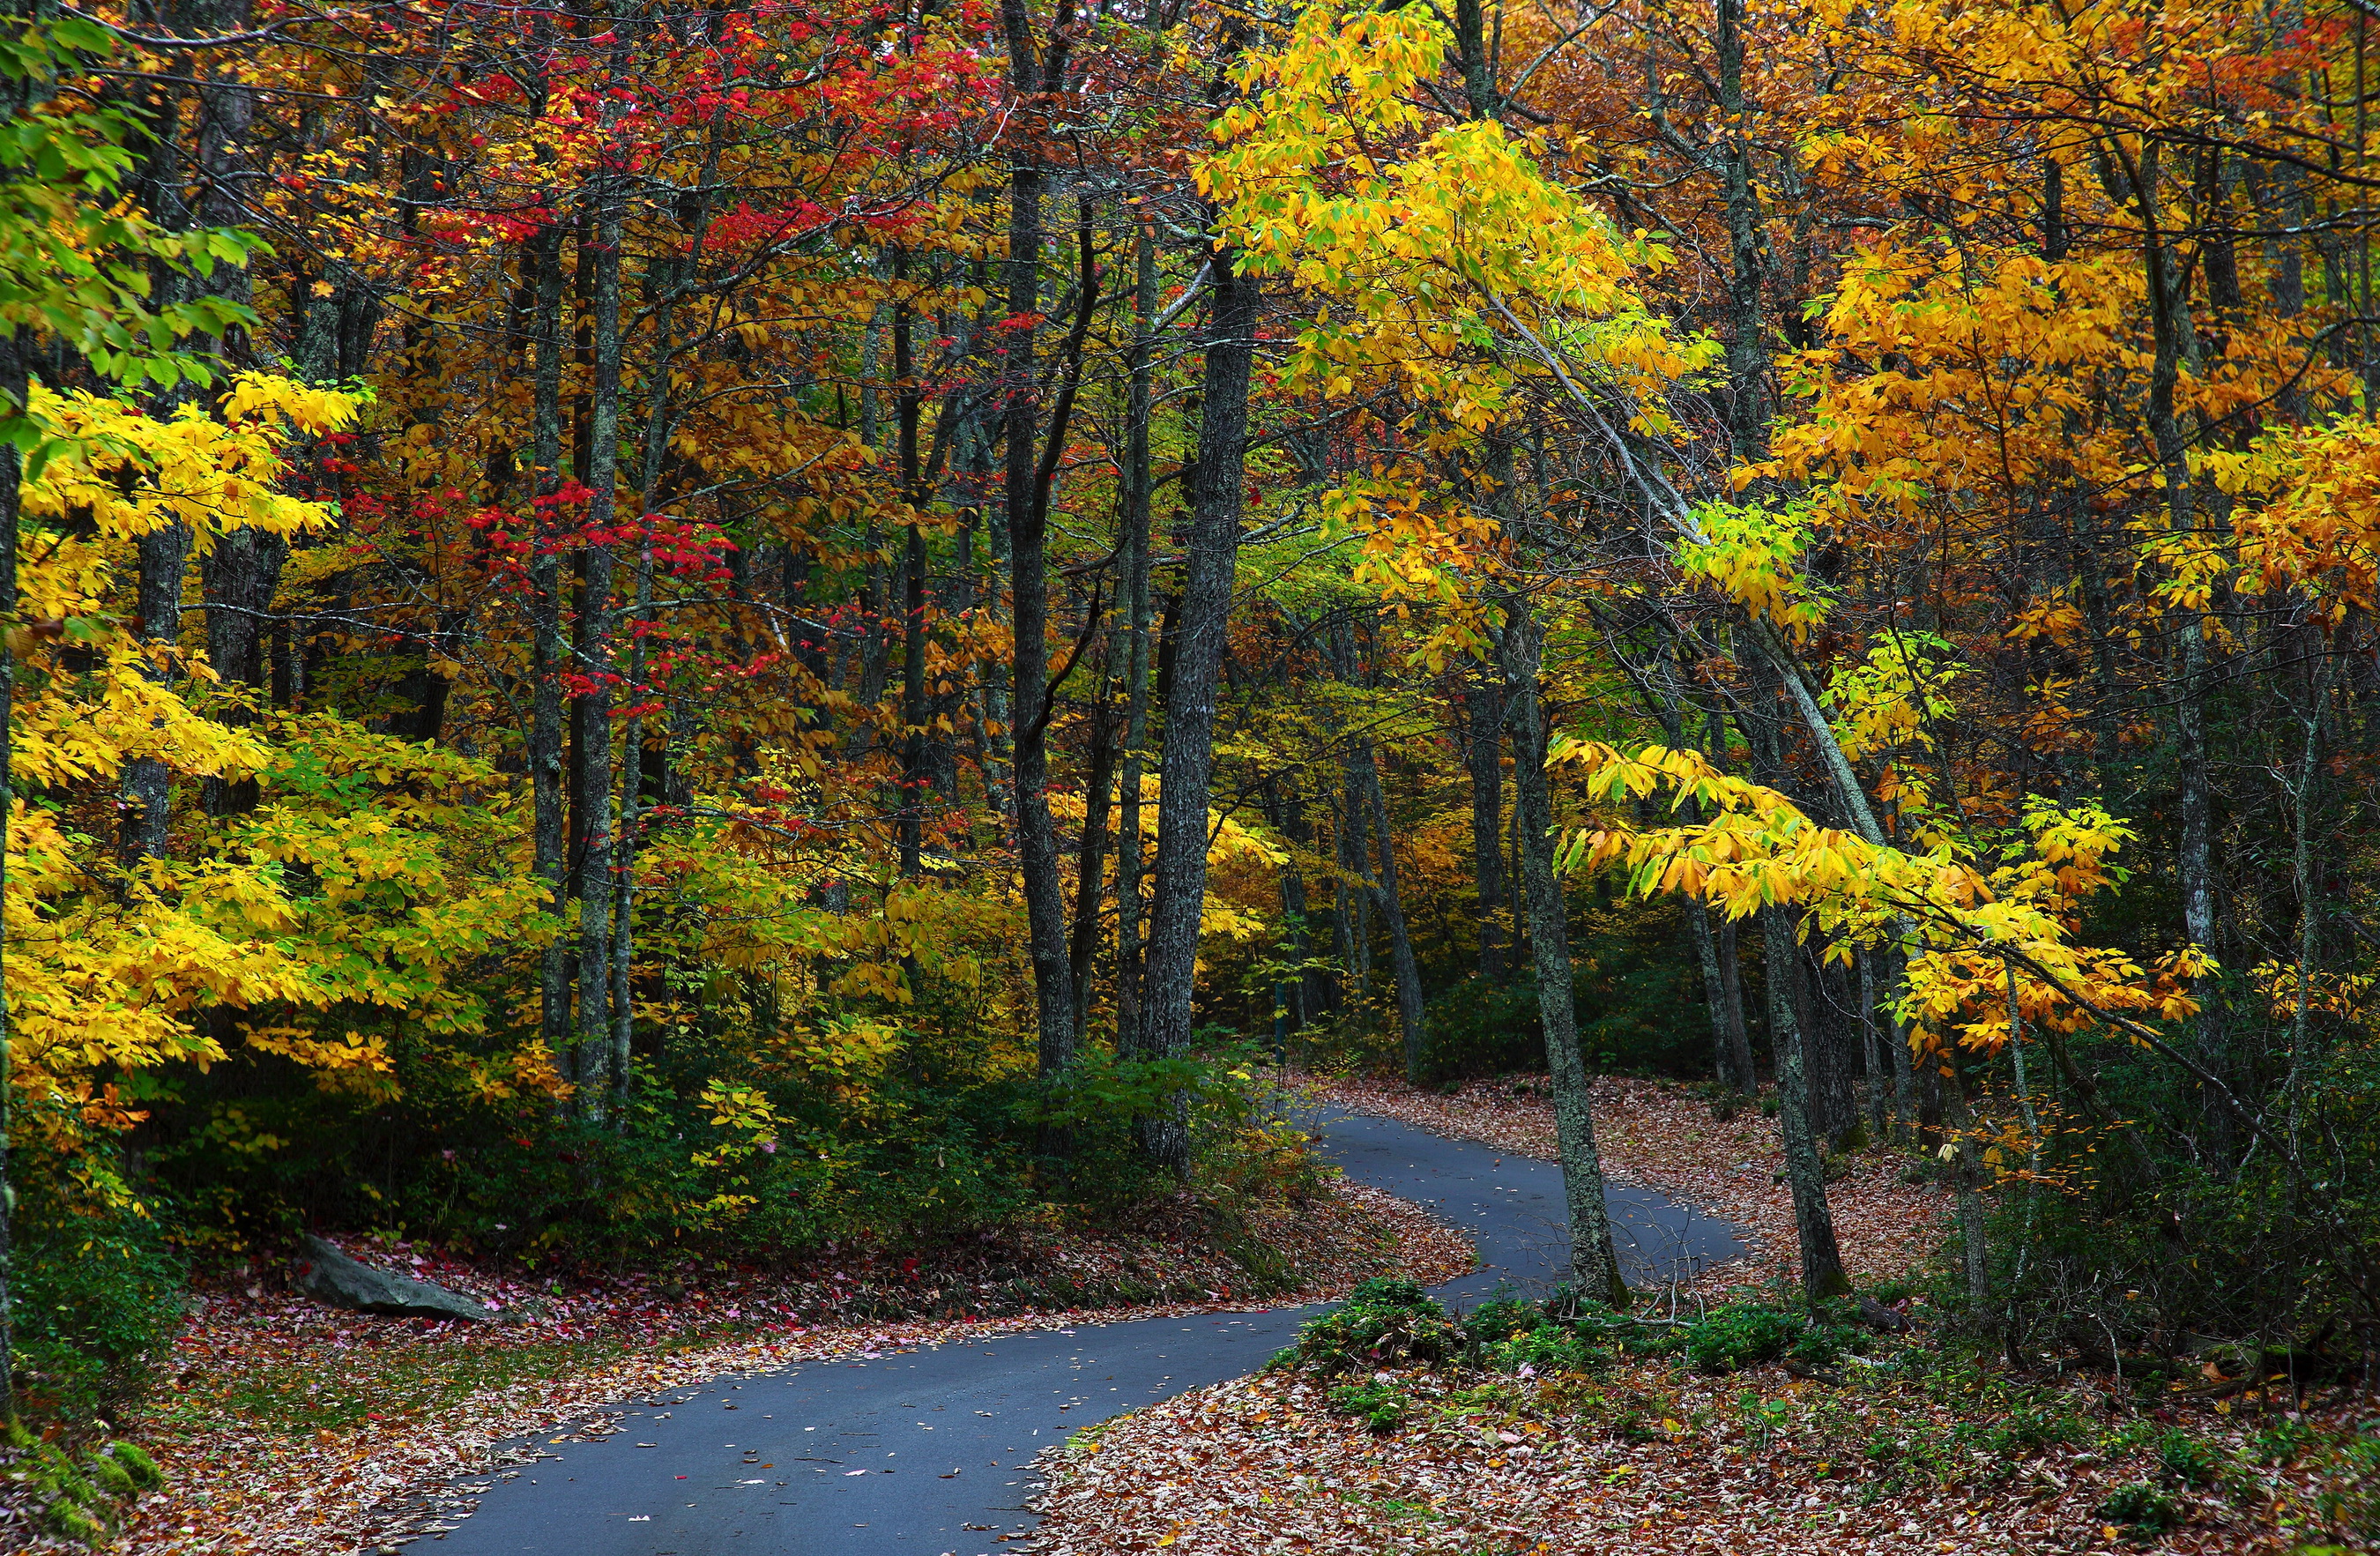 landscapes, Nature, Trees, Forests, Autumn, Fall, Seasons, Roads, Leaves Wallpaper